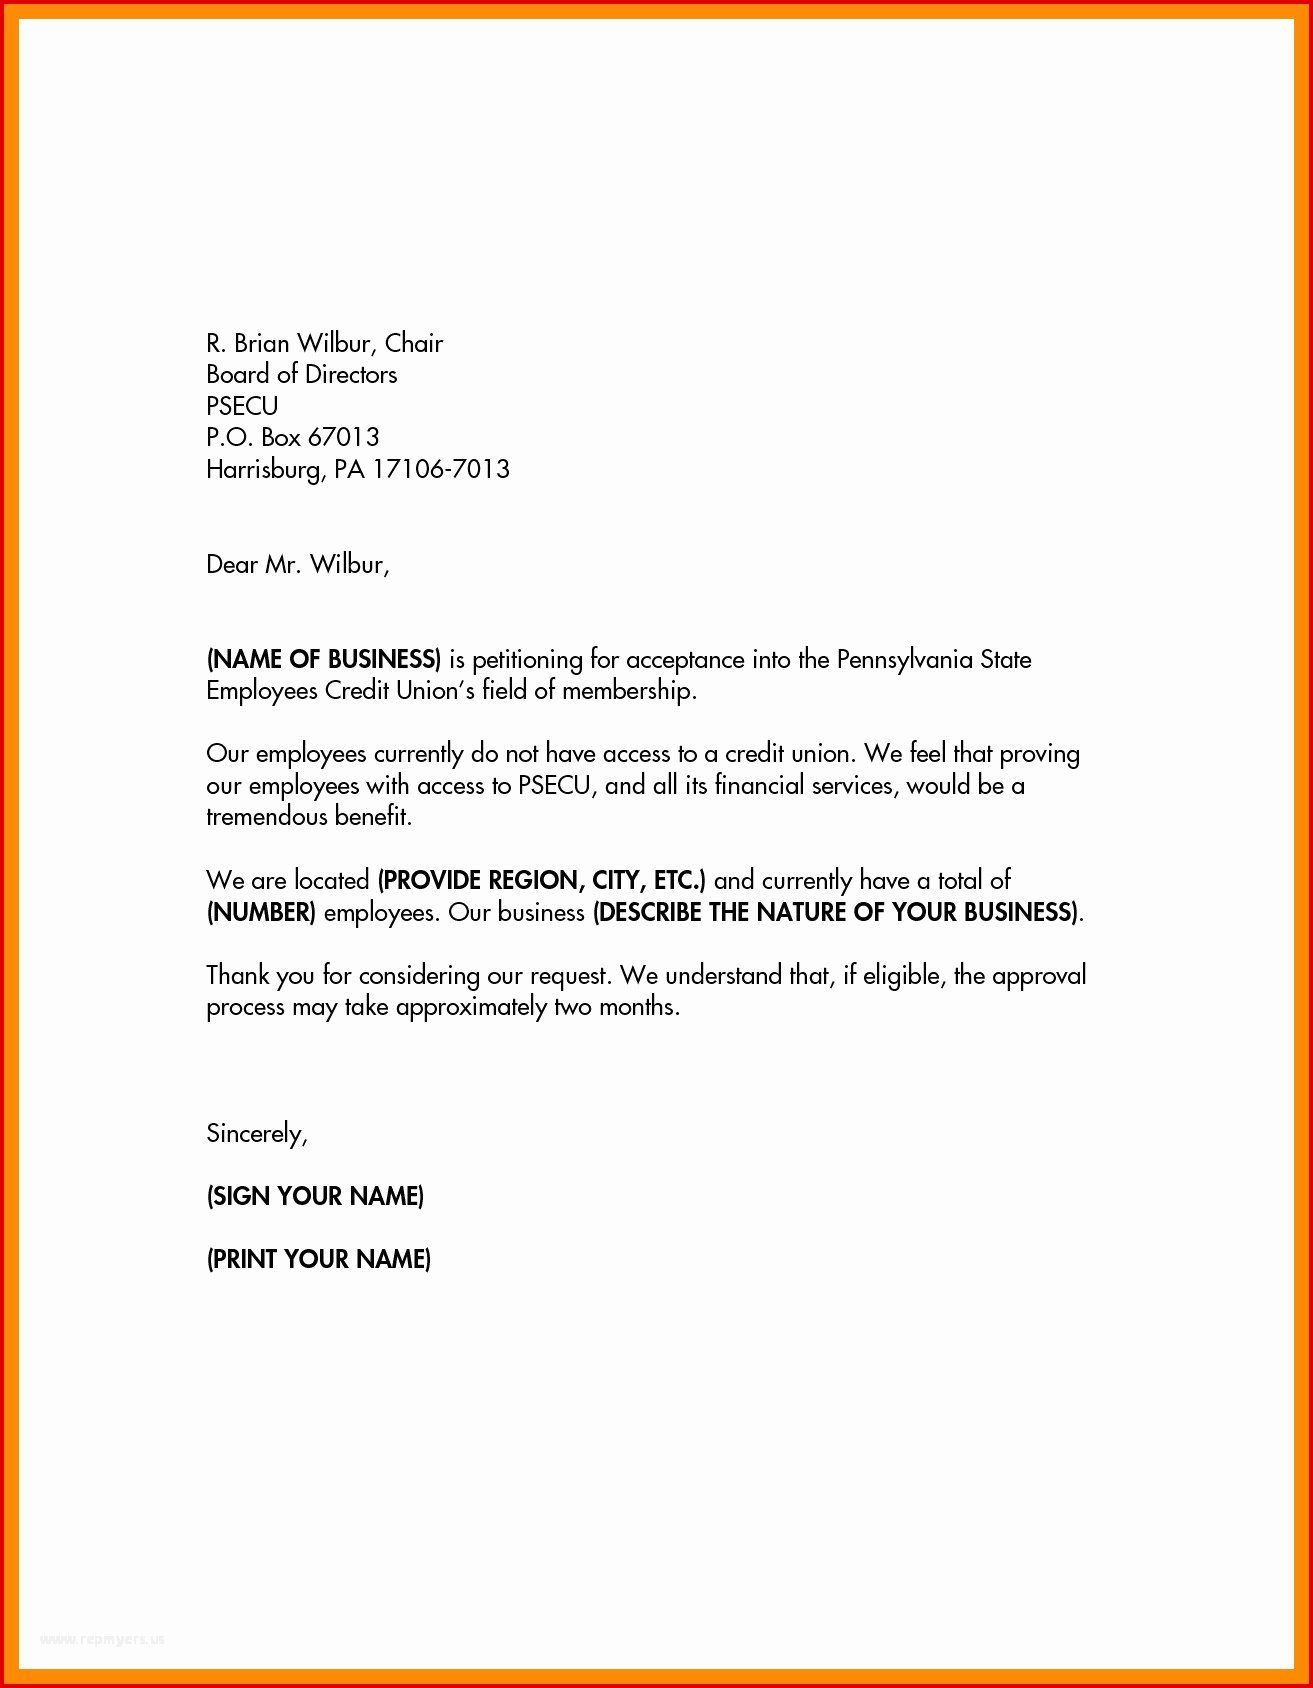 30 Niw Recommendation Letter Sample In 2020 Letter Of intended for dimensions 1313 X 1688